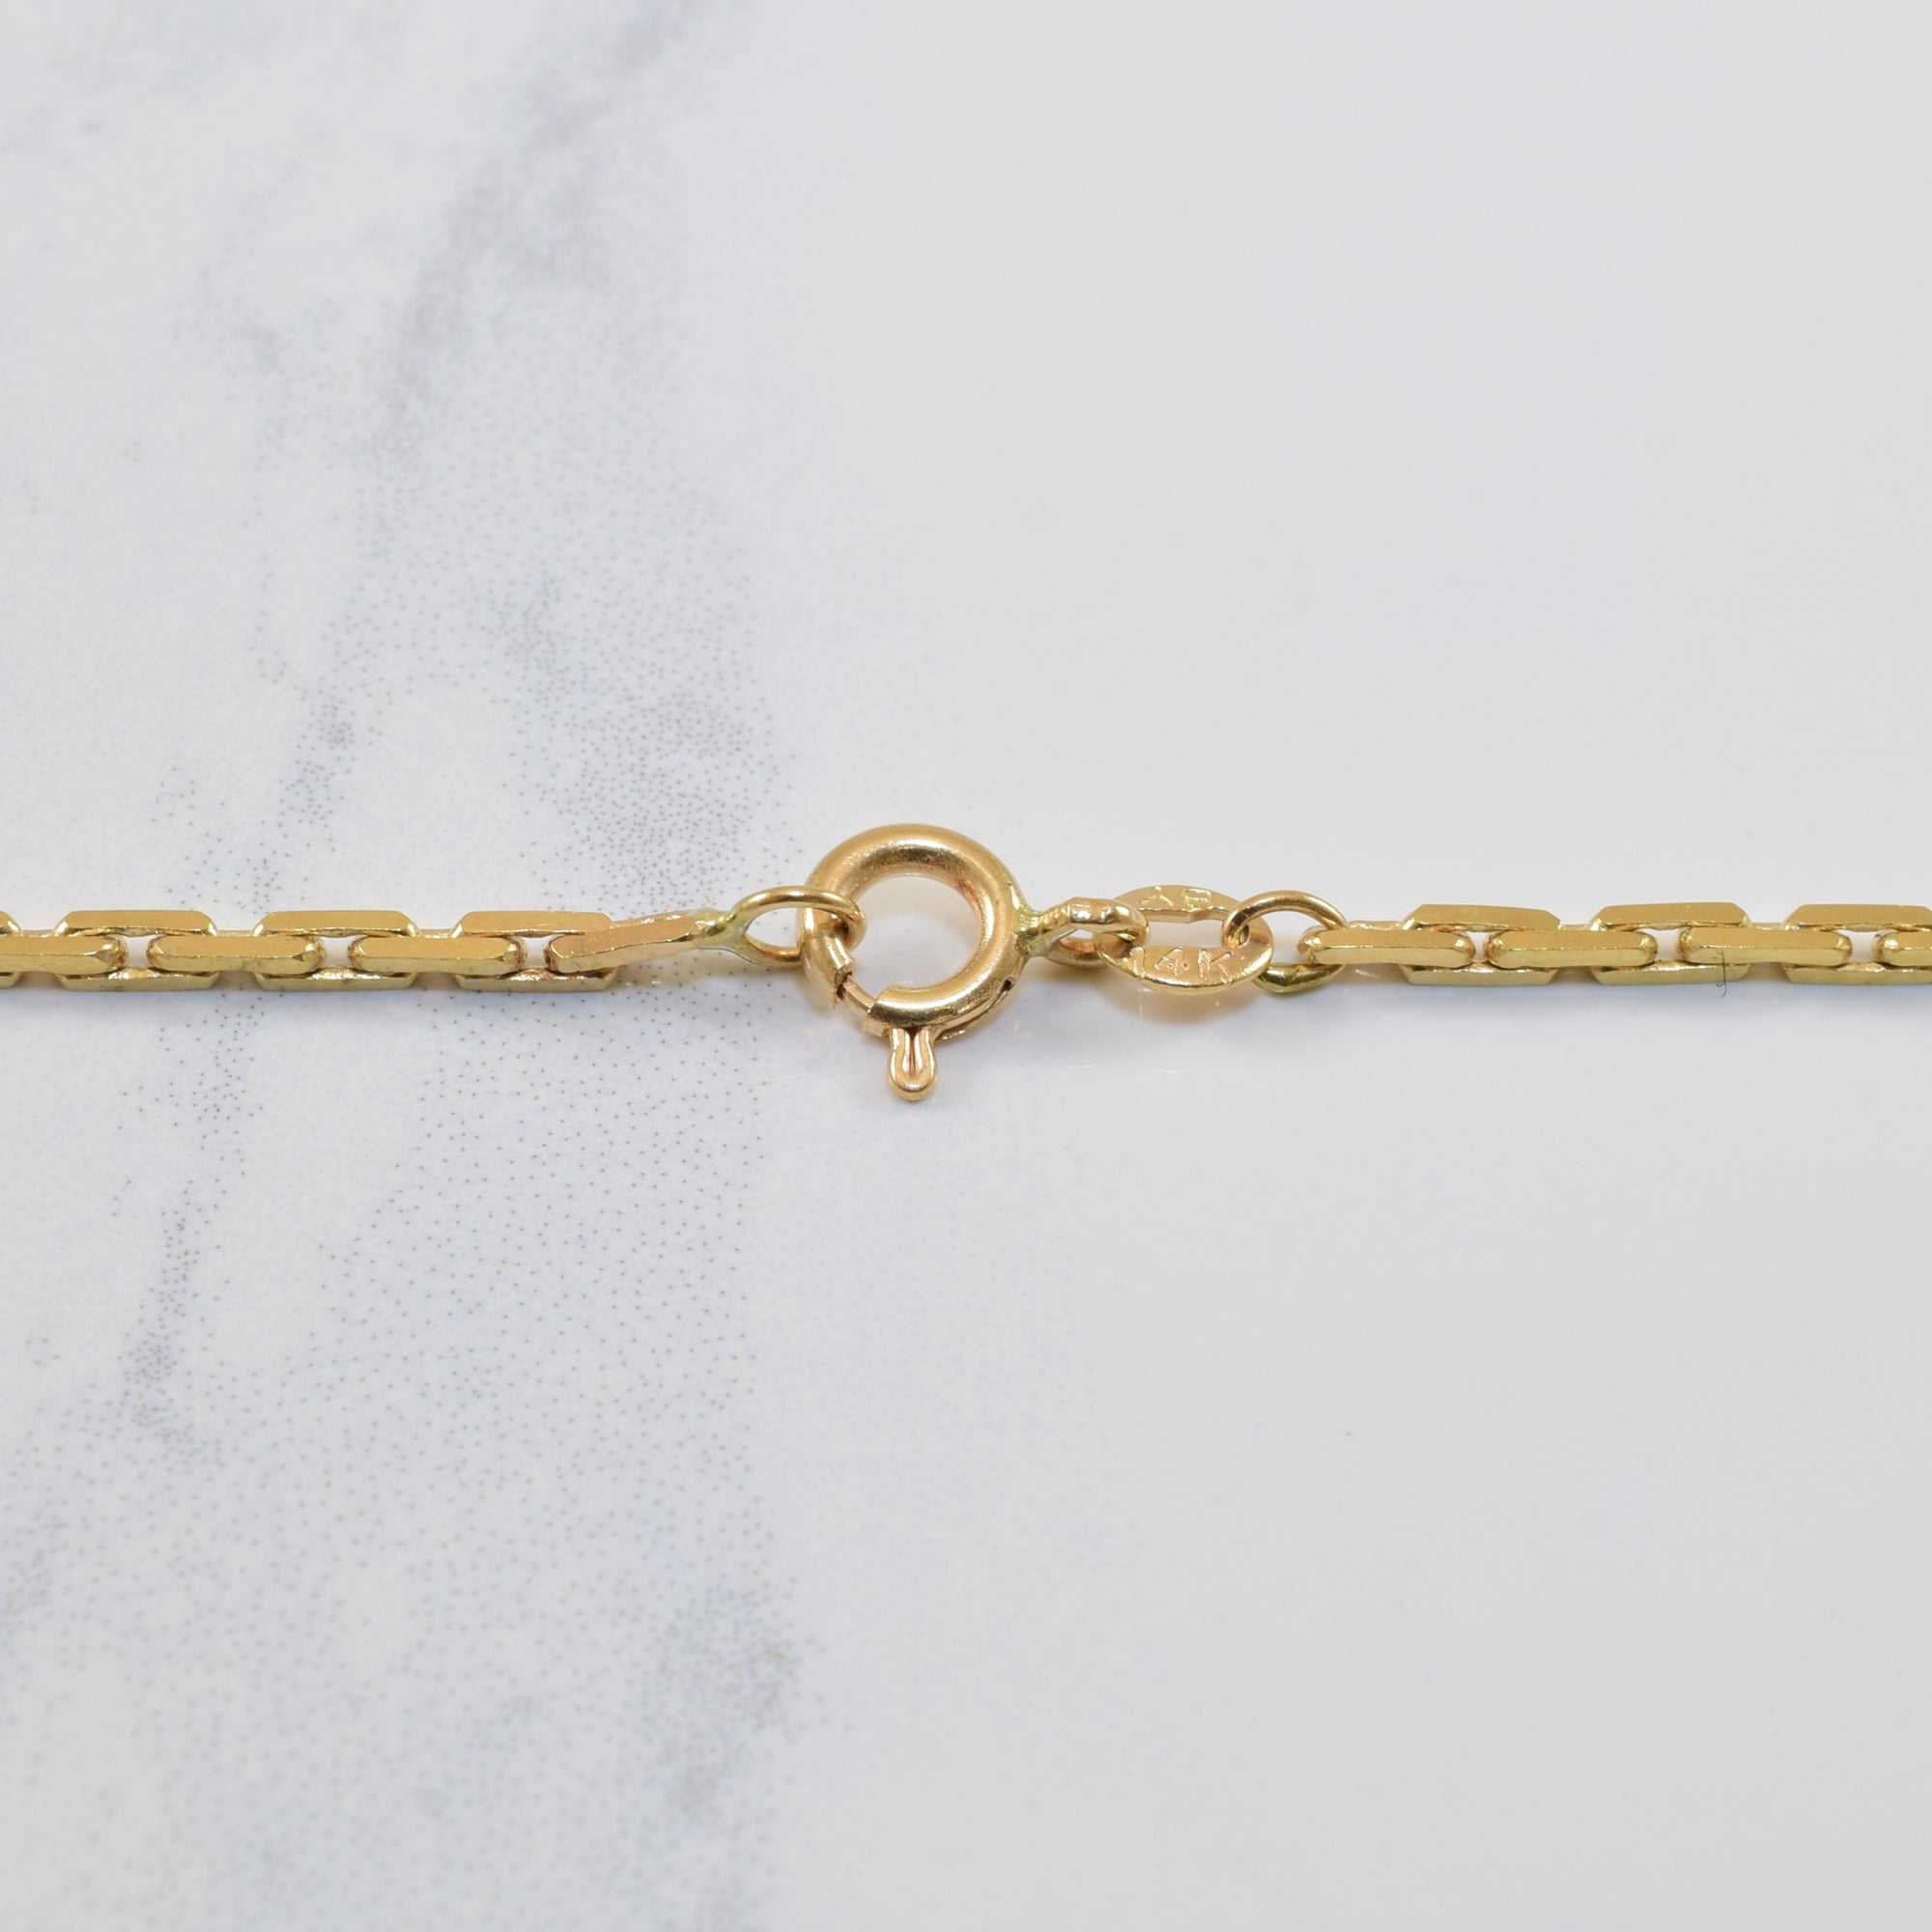 14k Yellow Gold Cable Chain | 30